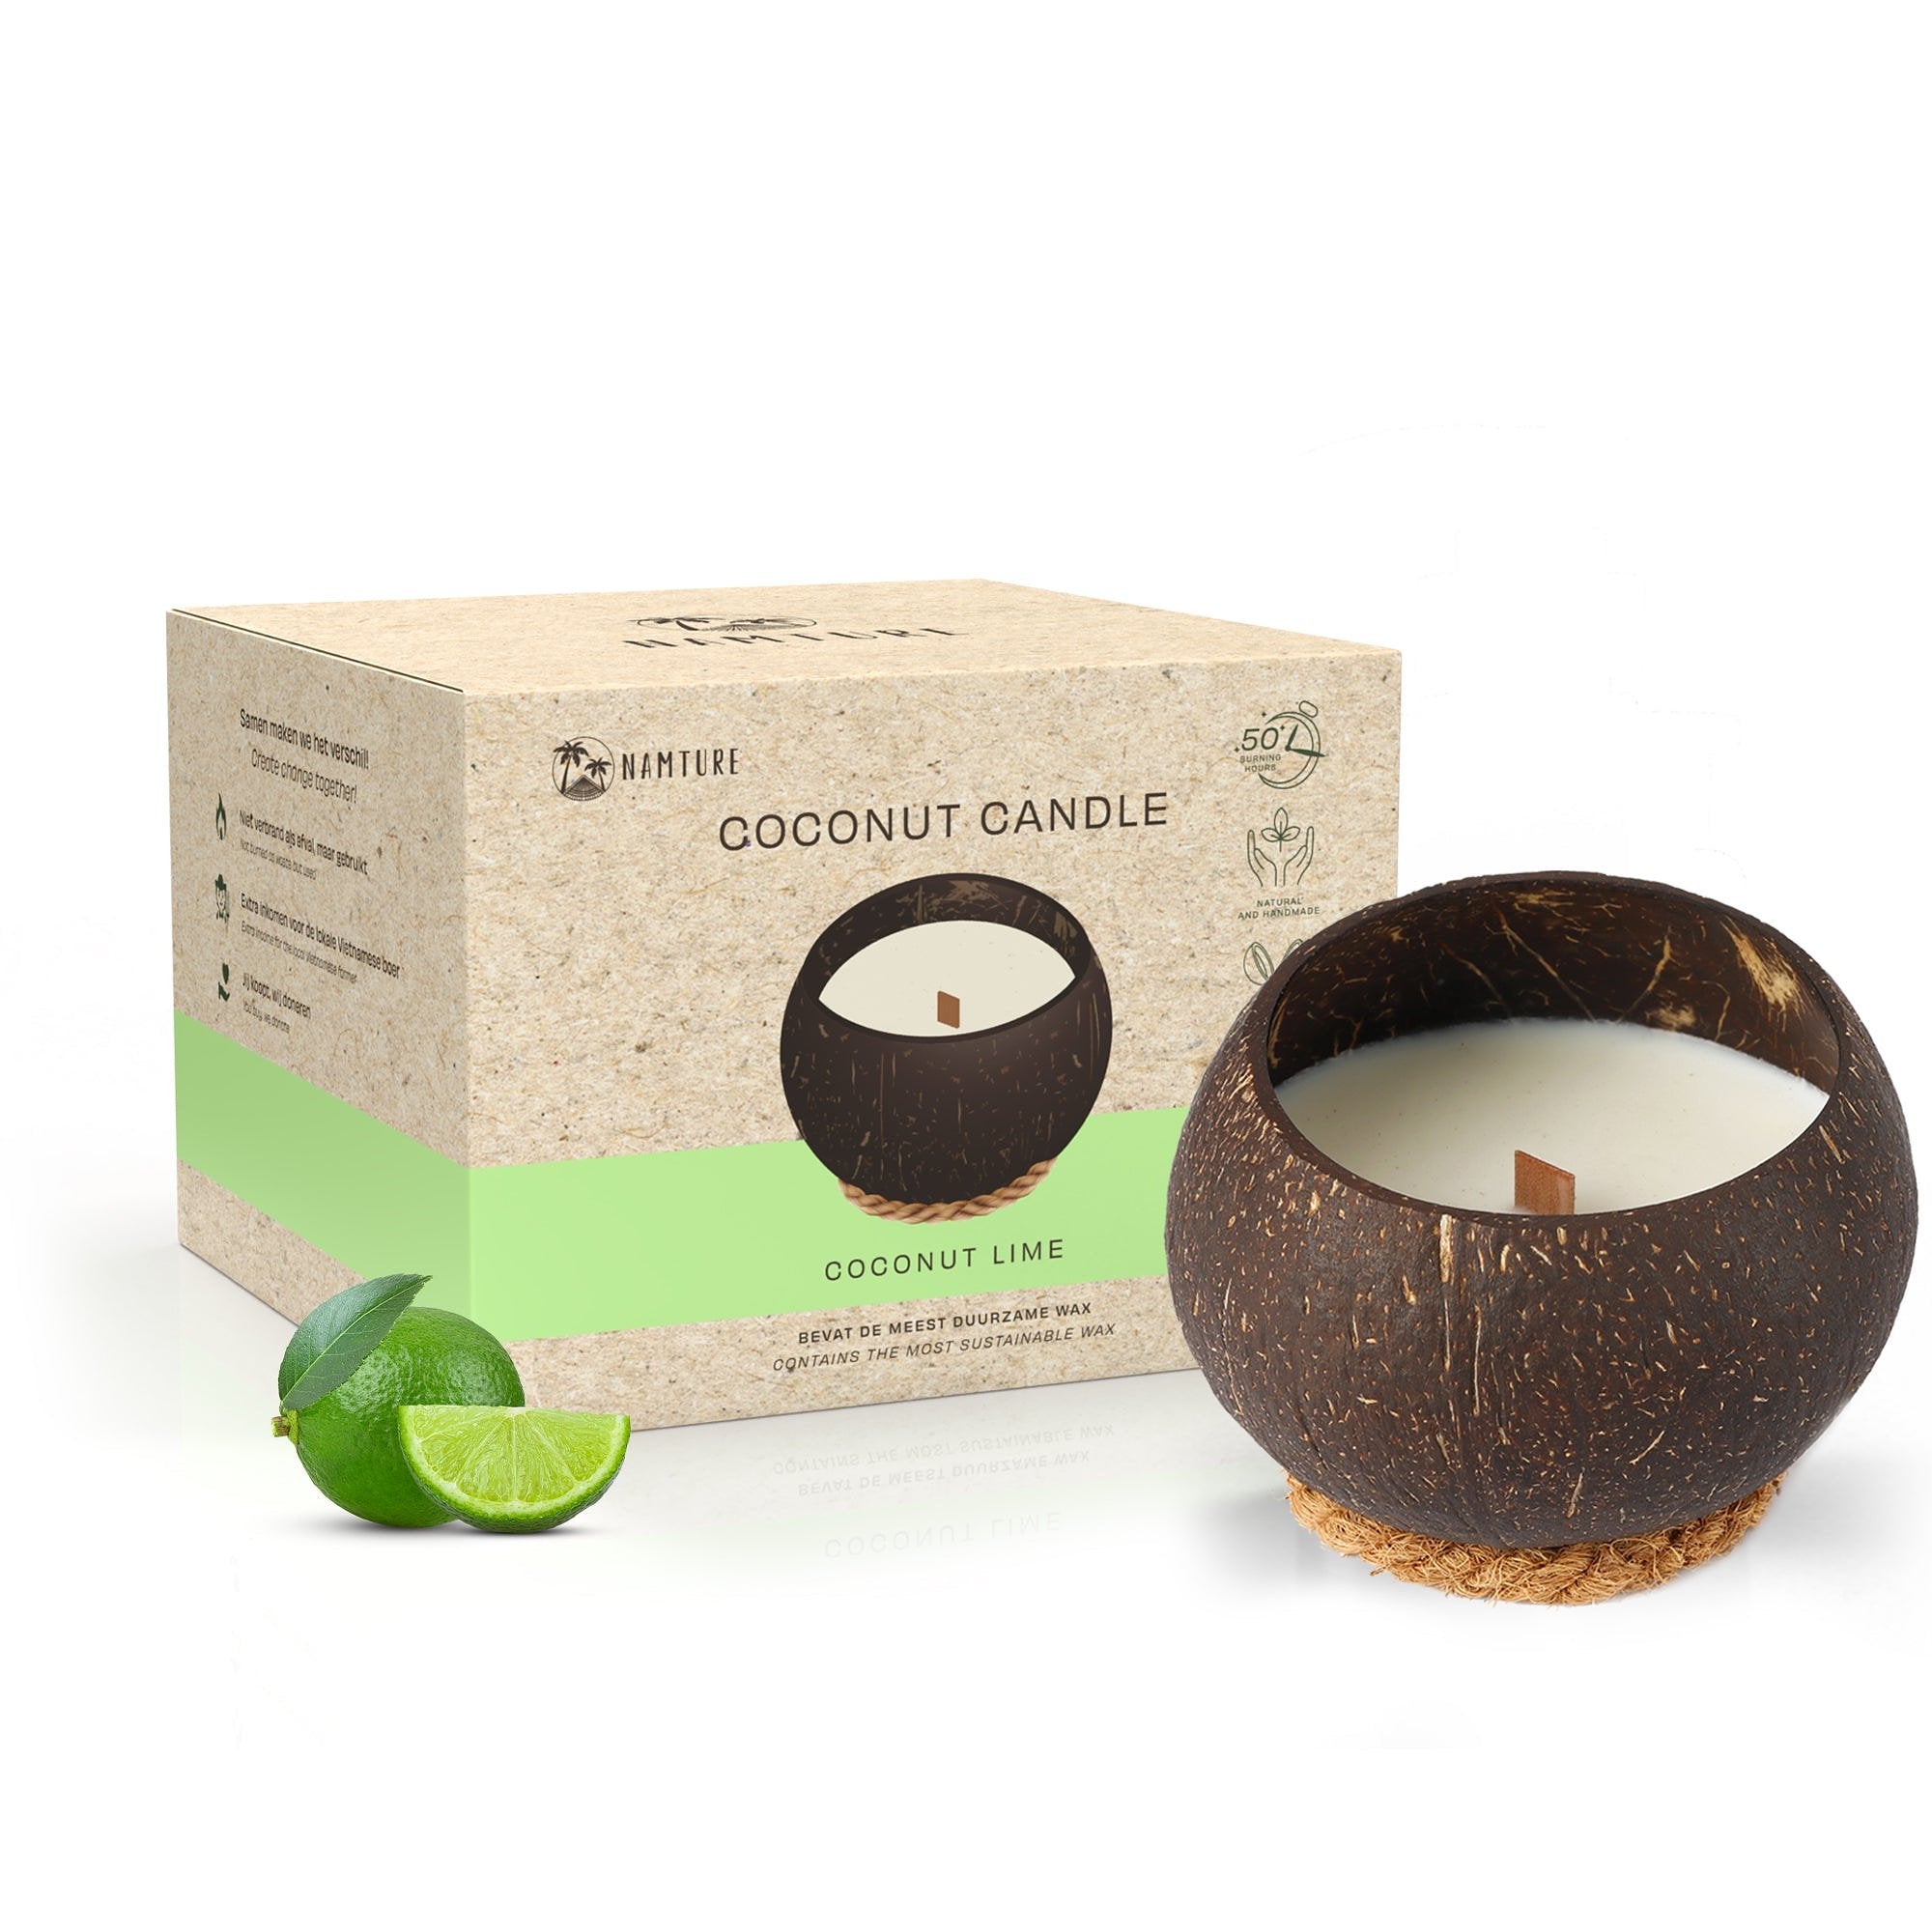 NAMTURE Coconut candle Toasted Coconut 2 pack